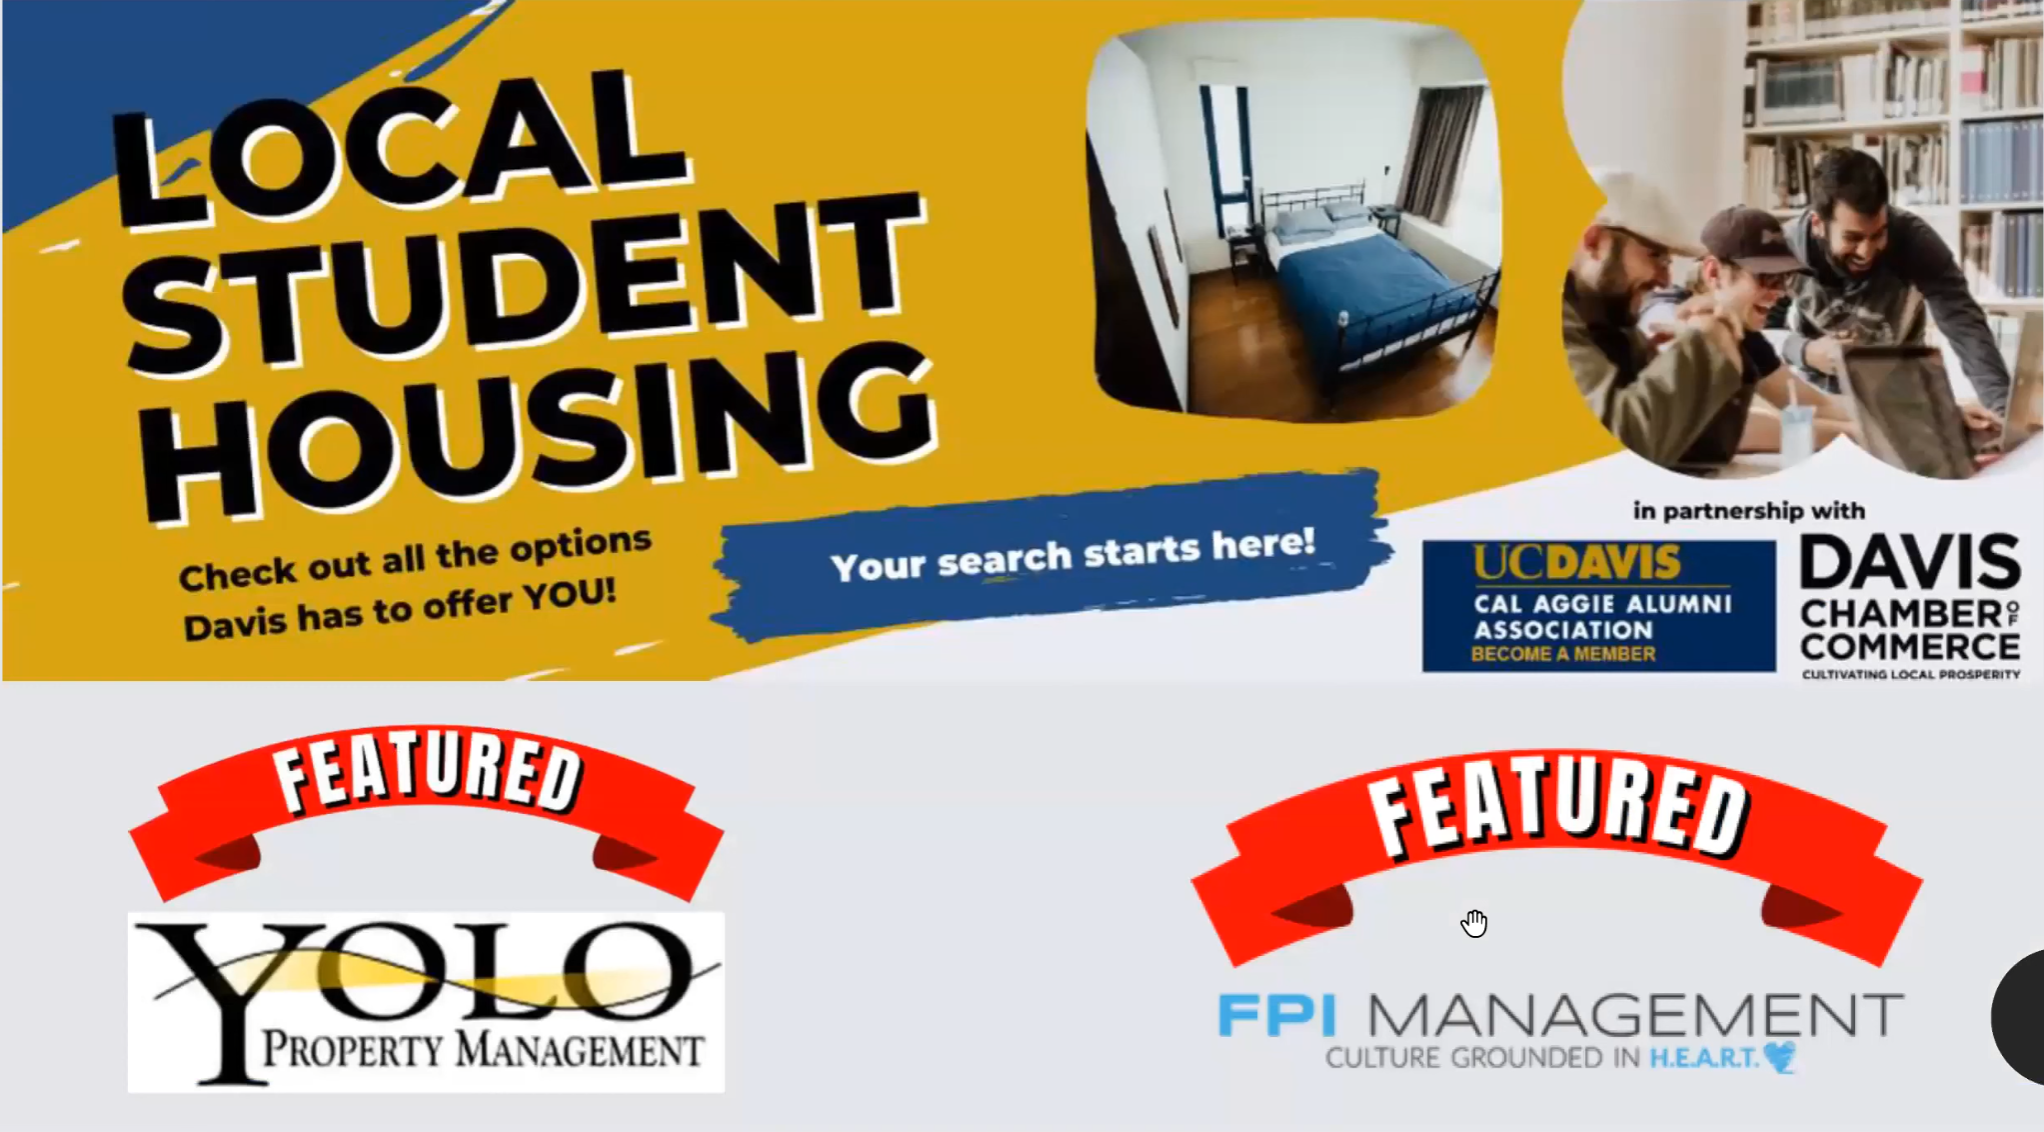 Information slide promoting "Local Student Housing" companies with logos for Yolo Property Management and FPI Management.